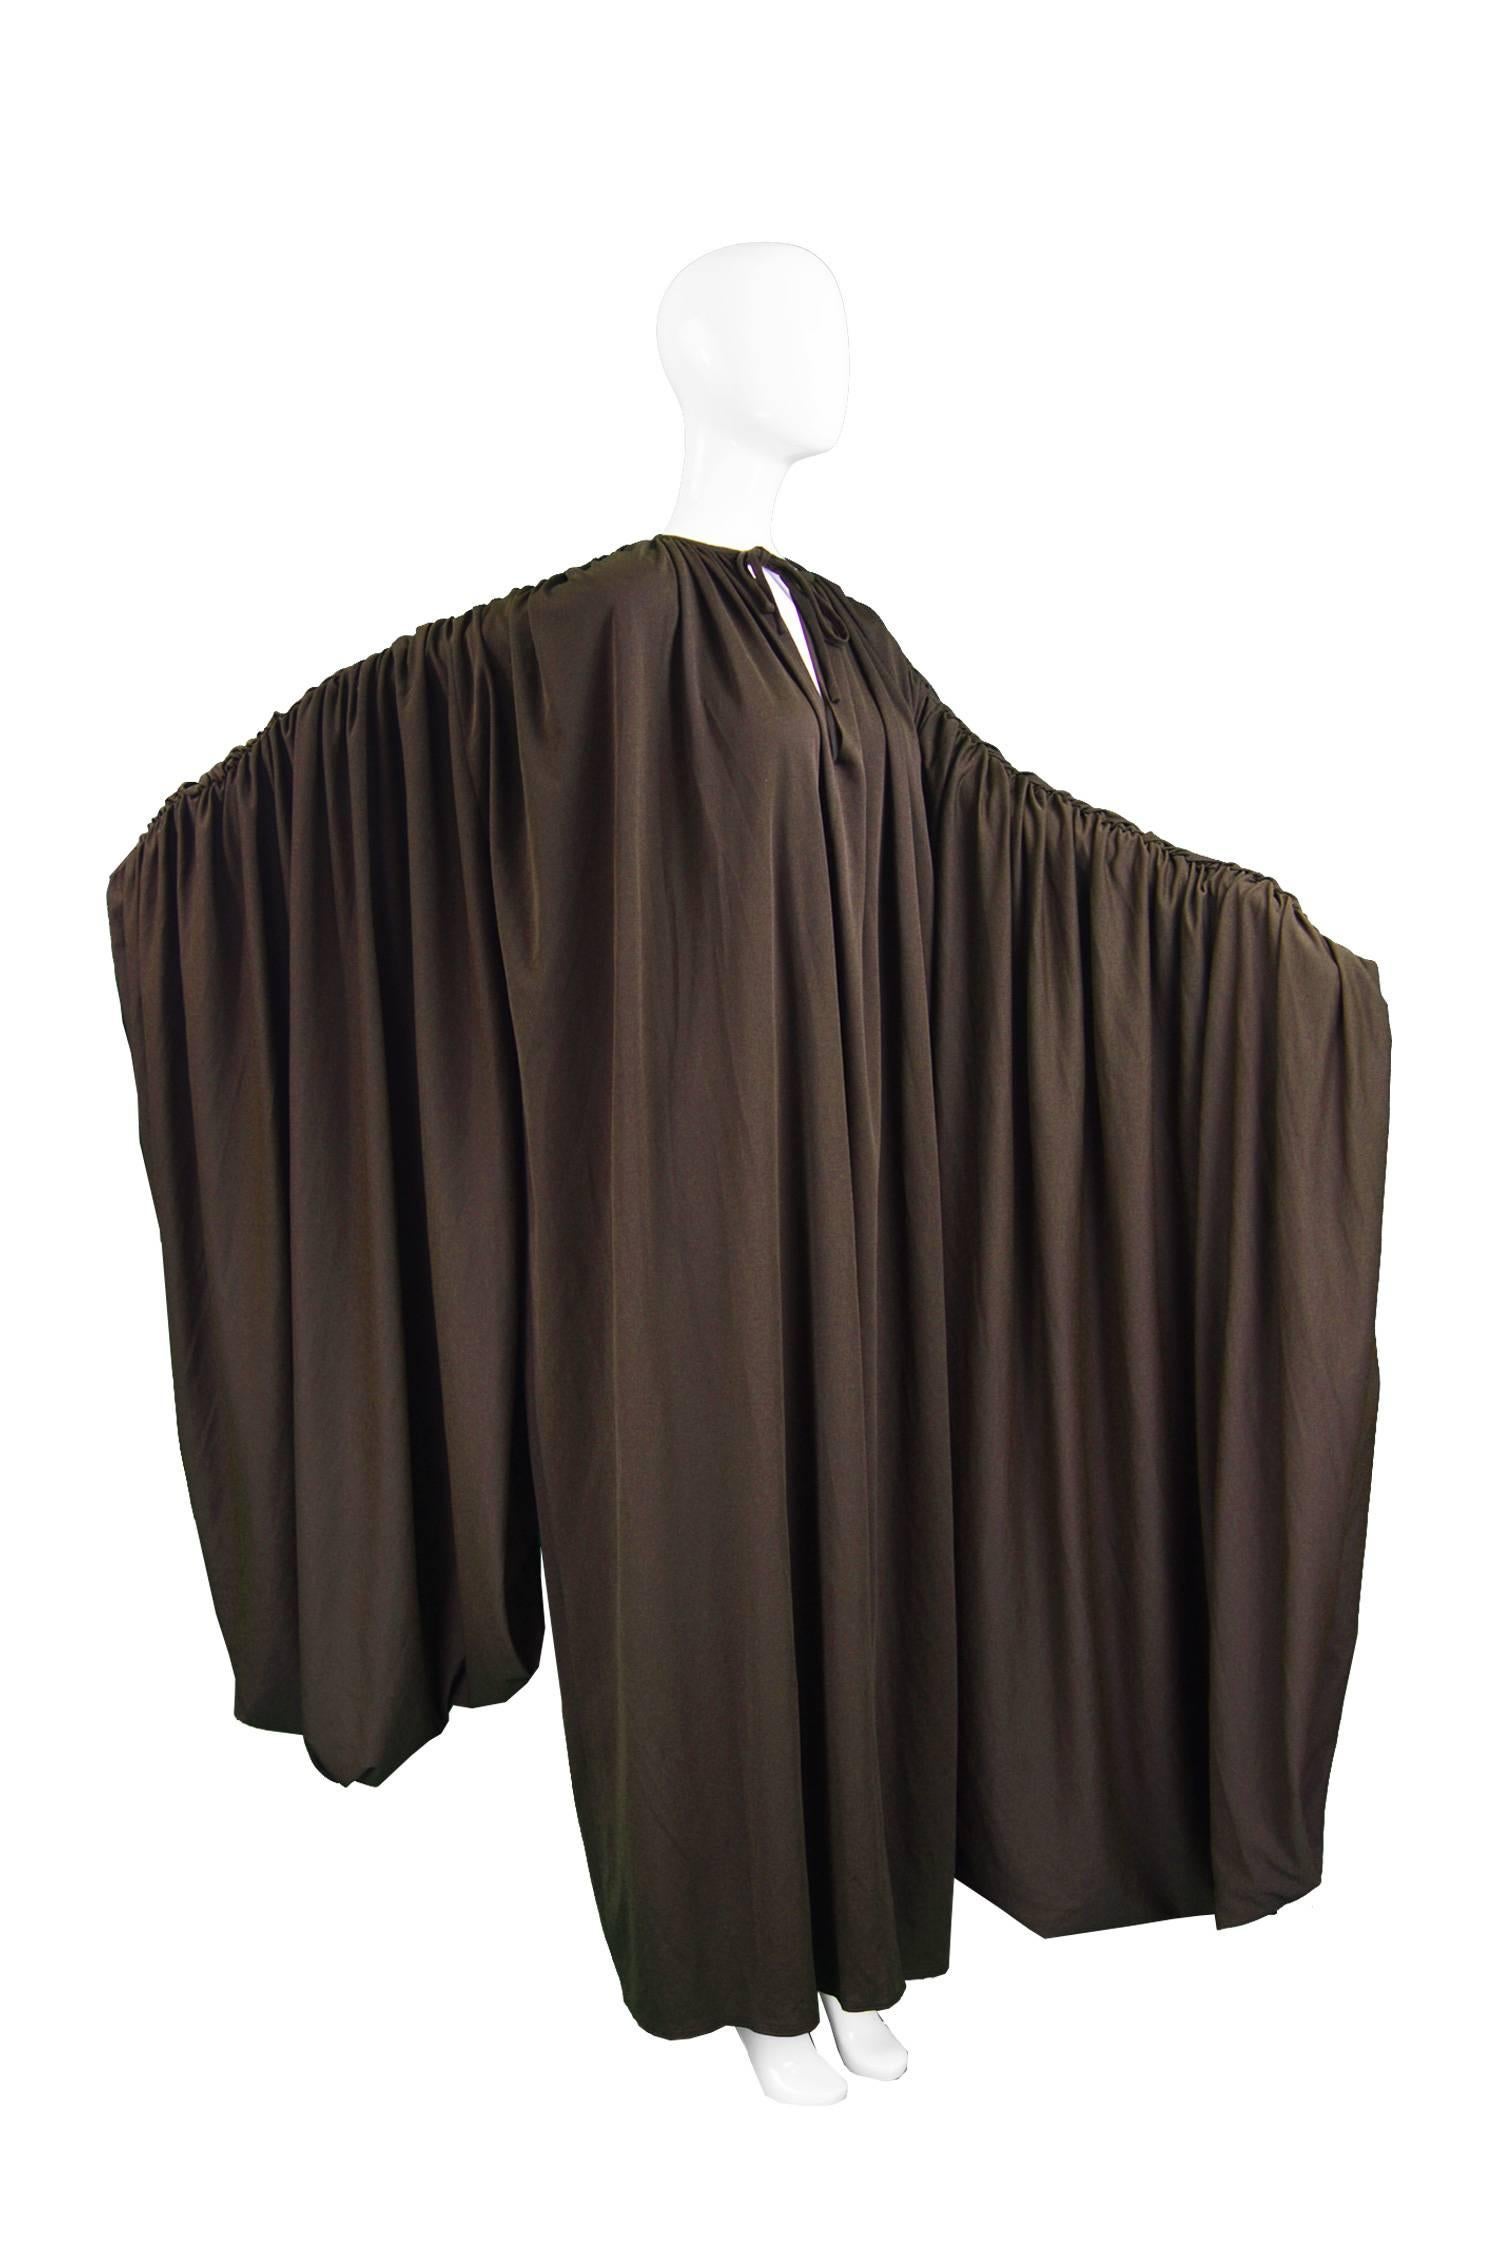 Vintage 1970s Kimono Style Brown Maxi Dress with Huge Dramatic Sleeves 3